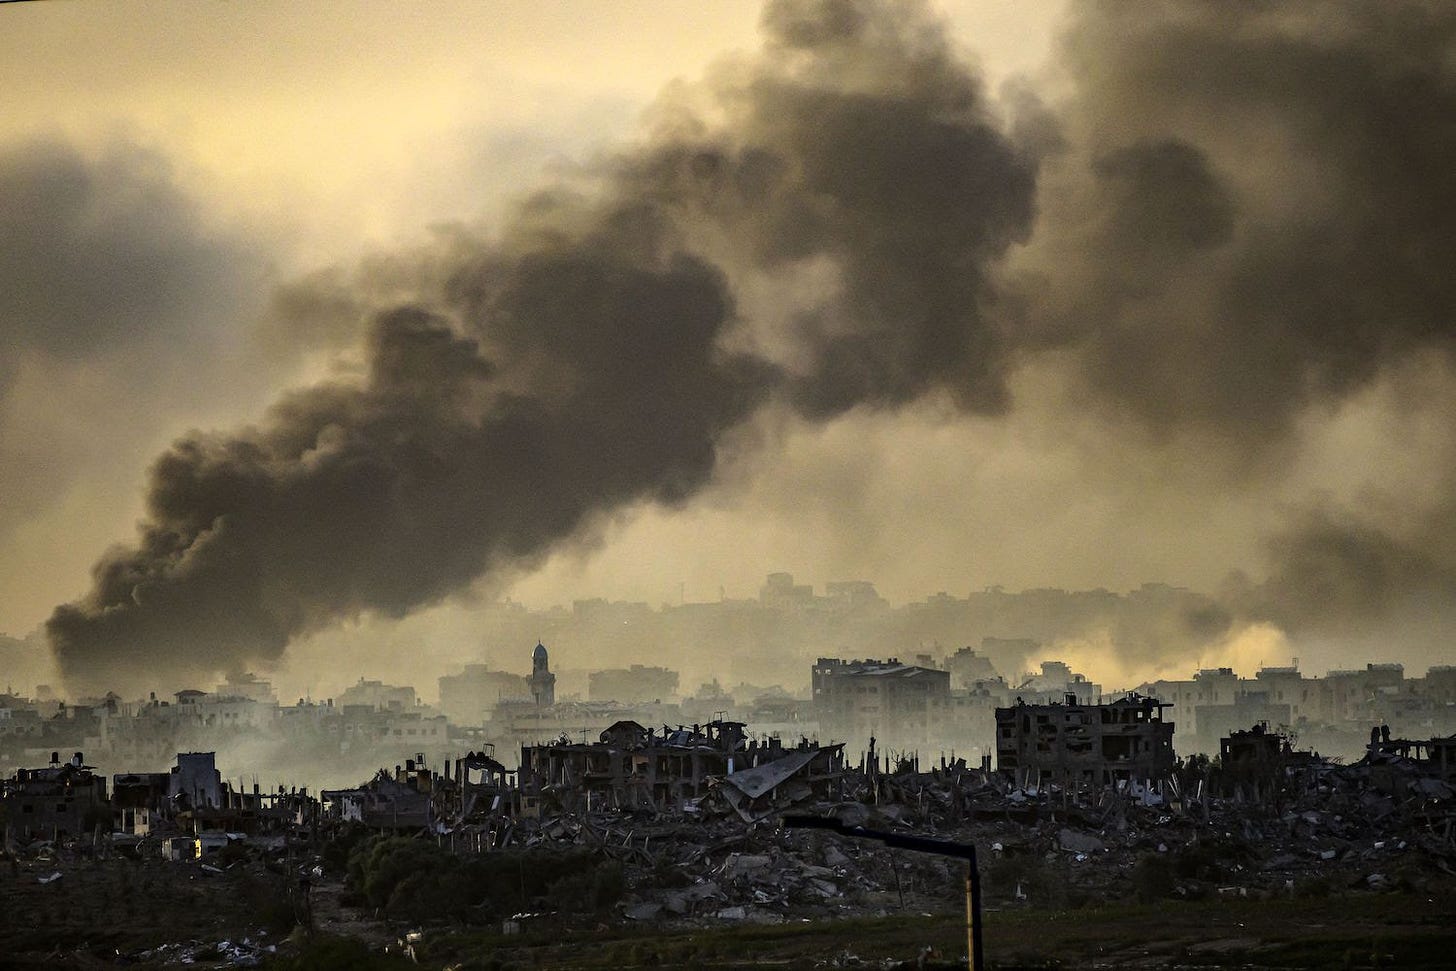 A wide shot shows a densely packed urban area of the Gaza Strip. Many of the buildings have been leveled by explosions, leaving a dark mess of rubble. Smoke billows from different locations and fills the sky overhead, overlaying the cityscape in dusty gray.